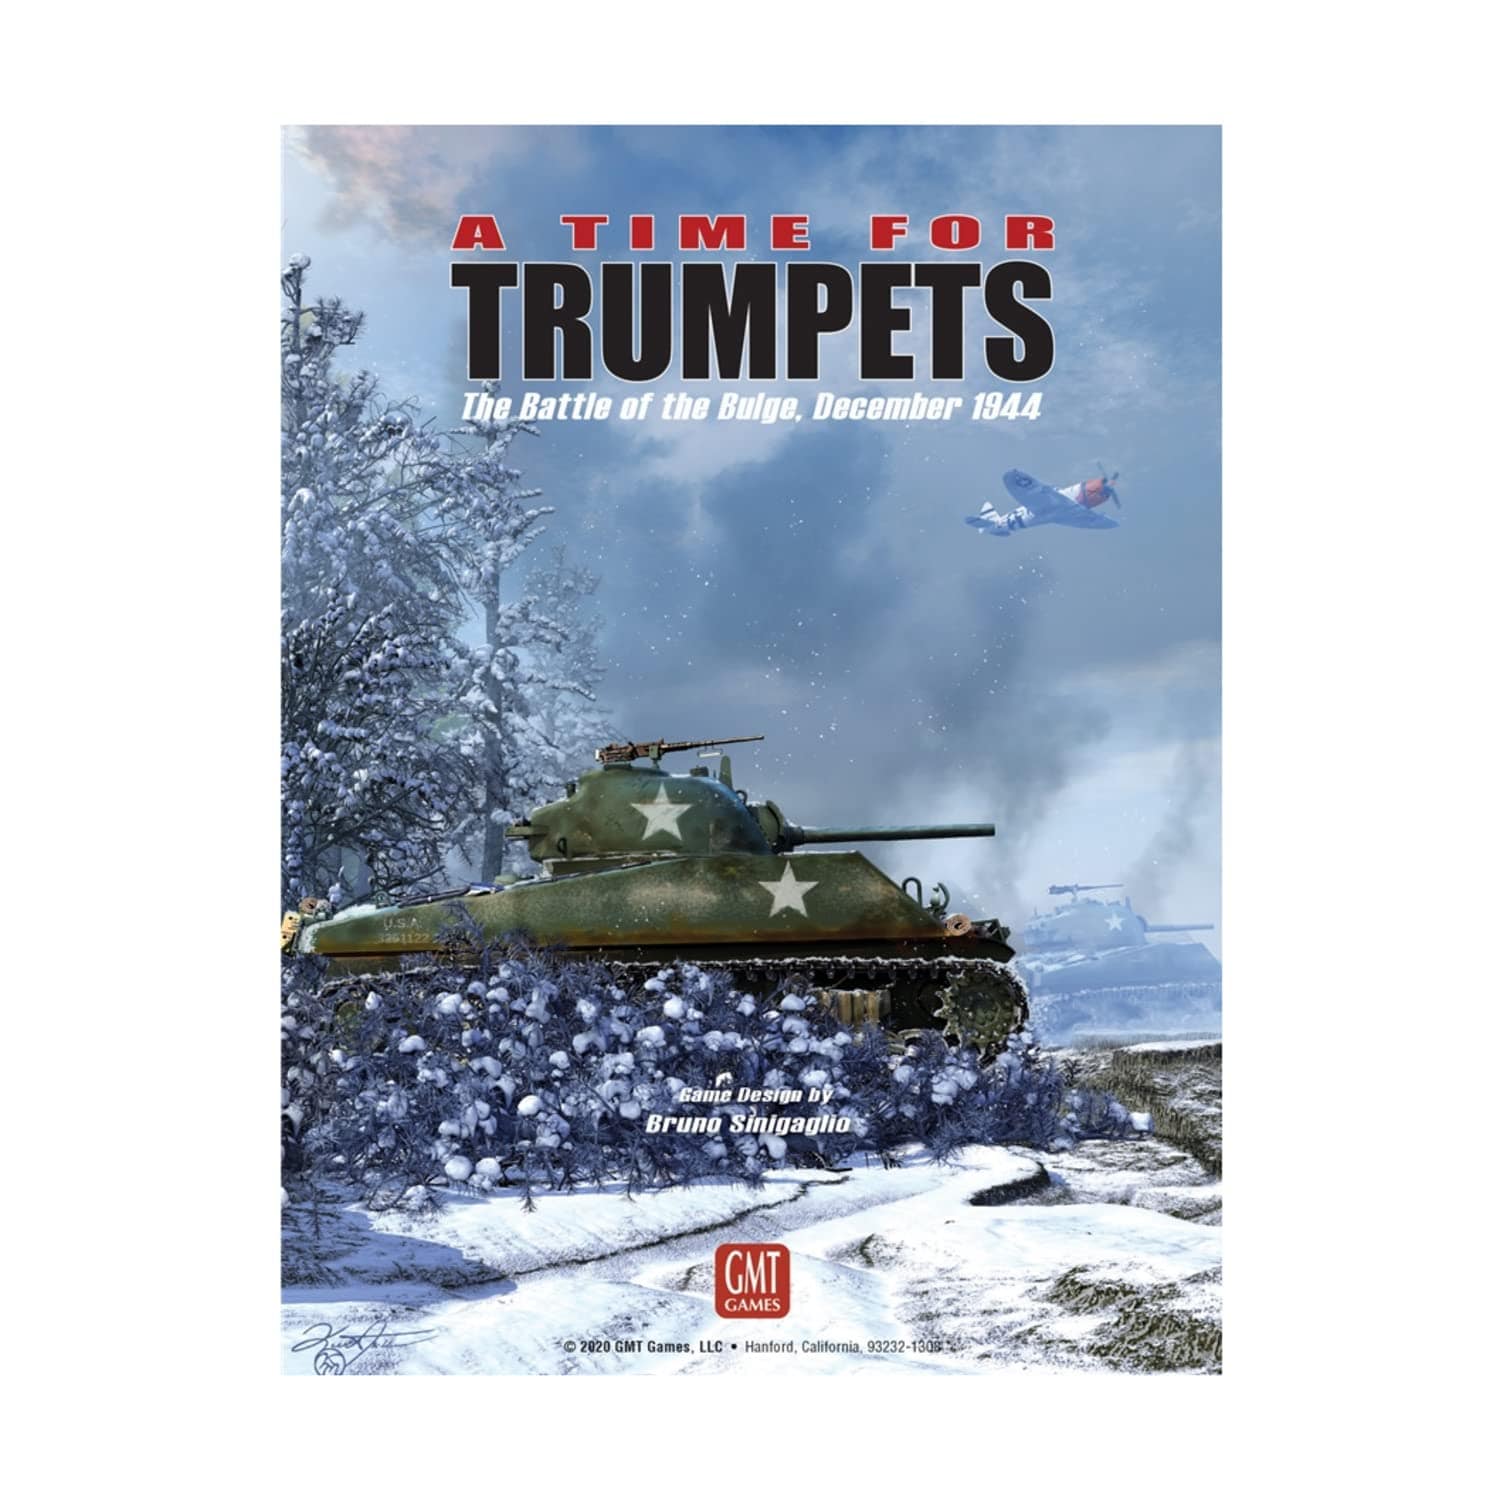 Gmt Games Board Games Gmt Games A Time for Trumpets: The Battle of the Bulge, December 1944